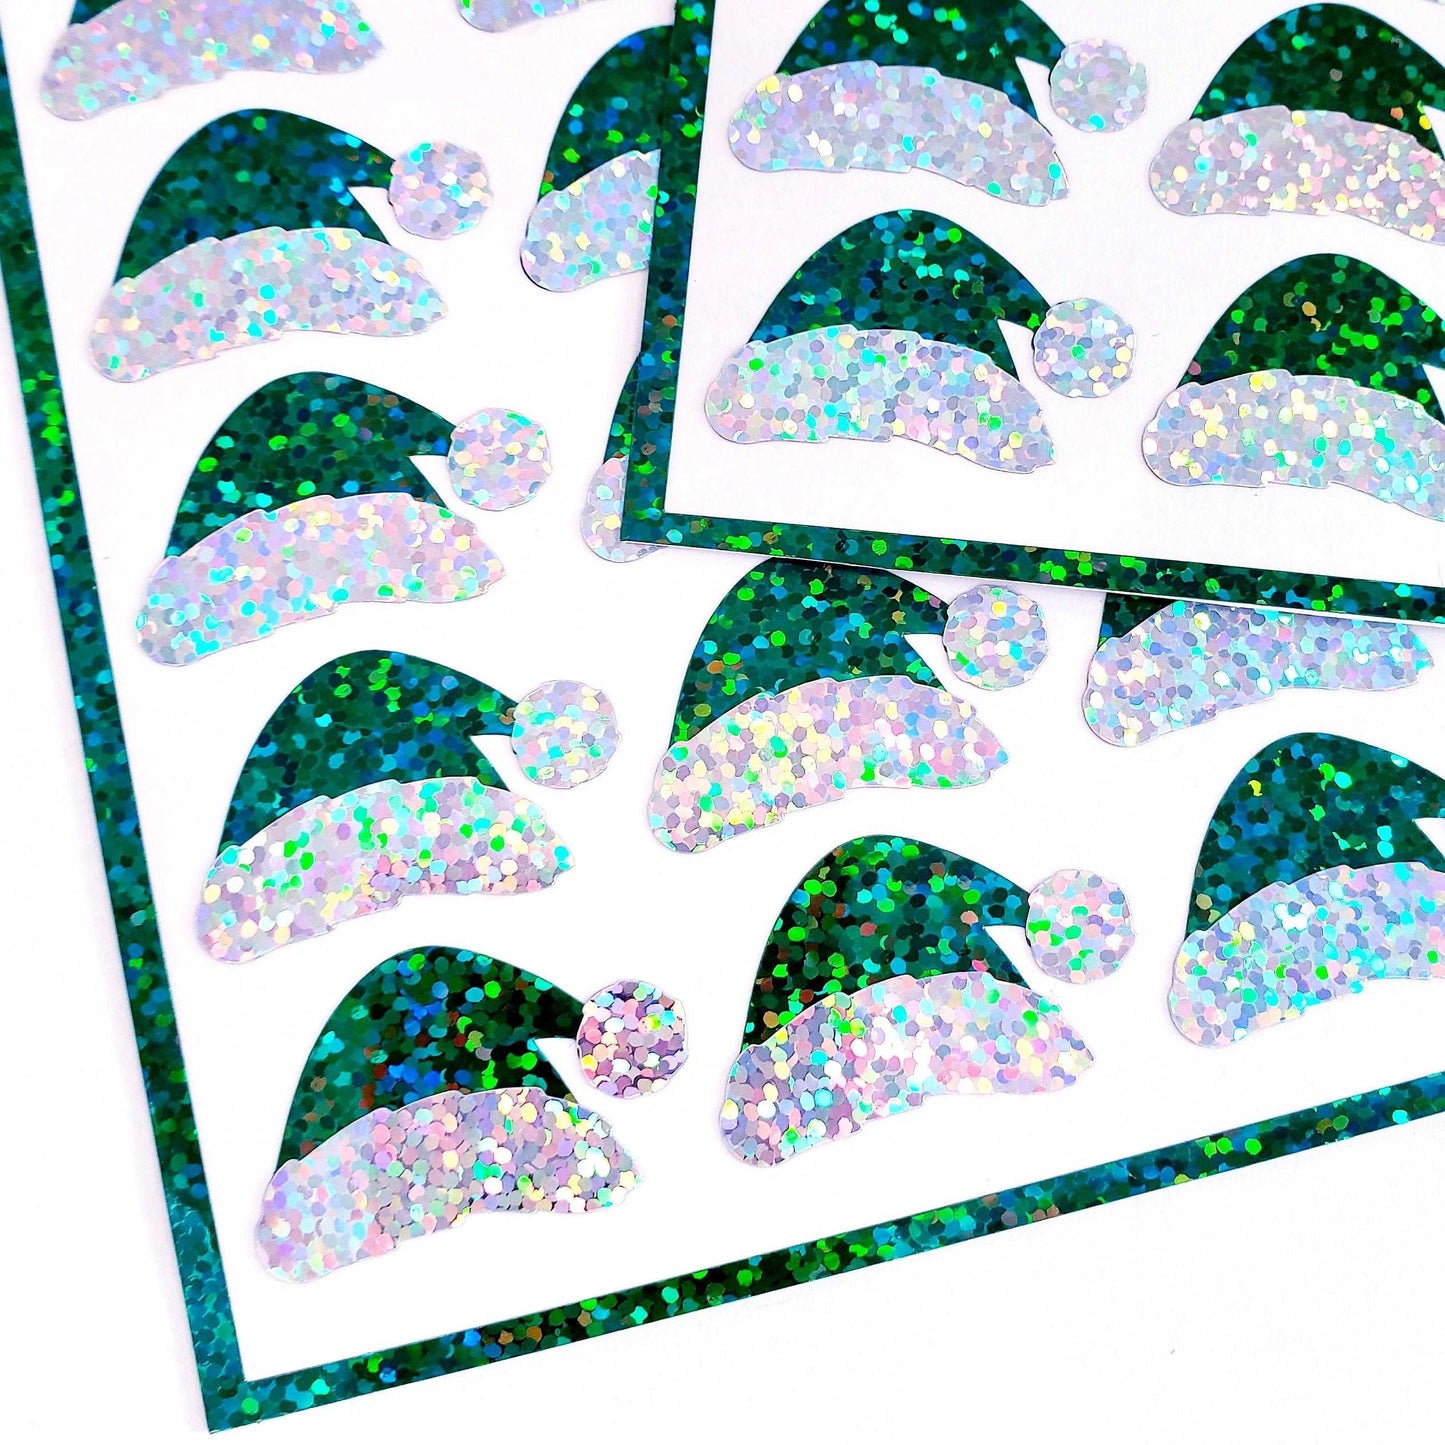 Elf Hats Stickers. Set of 25 Santa's Helper Hat, decorative green glitter vinyl stickers for advent calendars, holiday cards and envelopes.